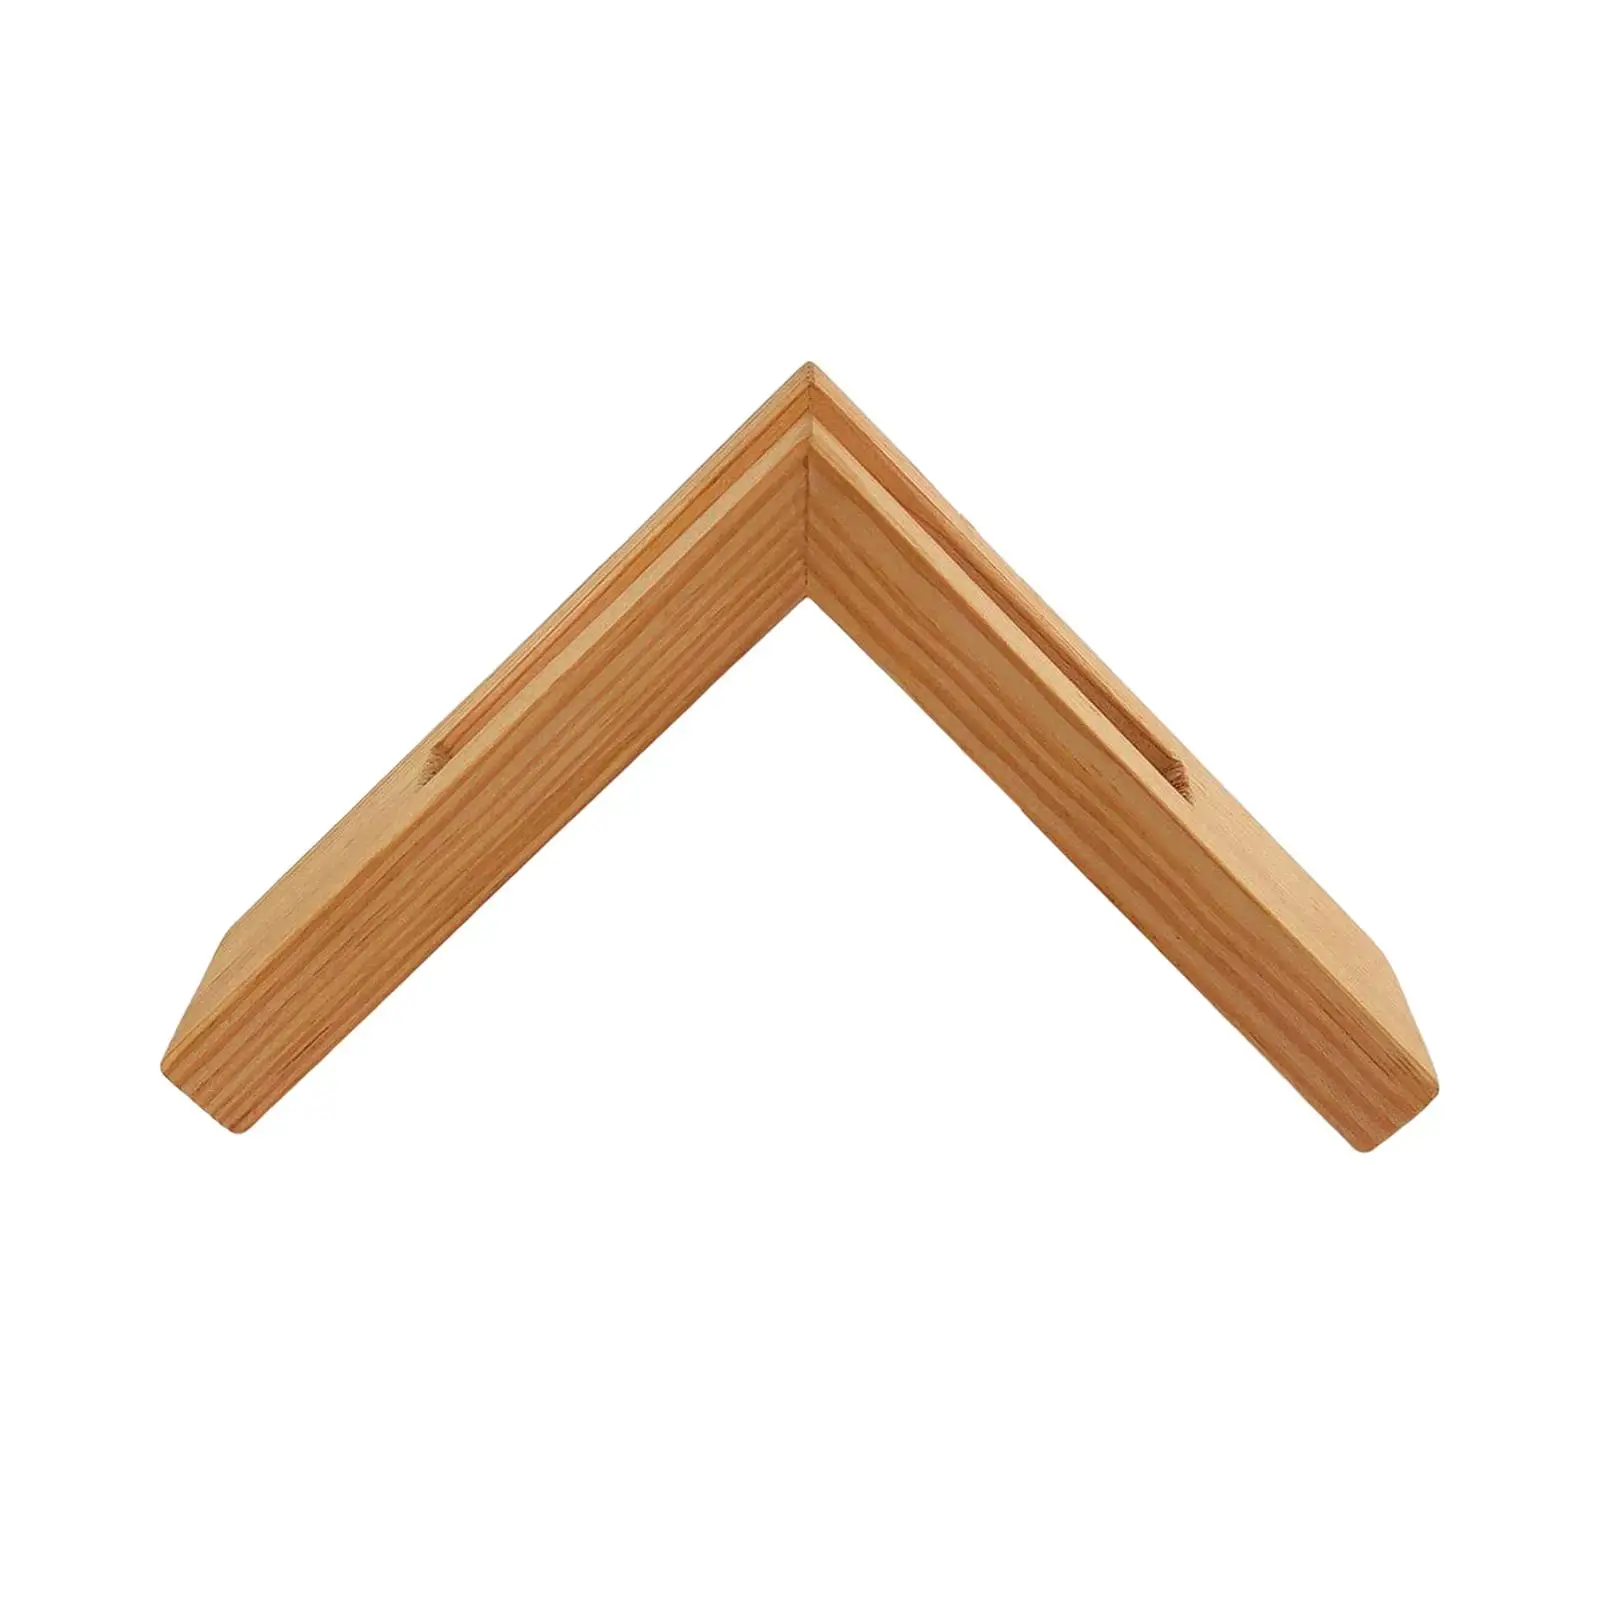 Wooden Napkin Holder Table Storage Inverted Triangle for Indoor Outdoor Use Party